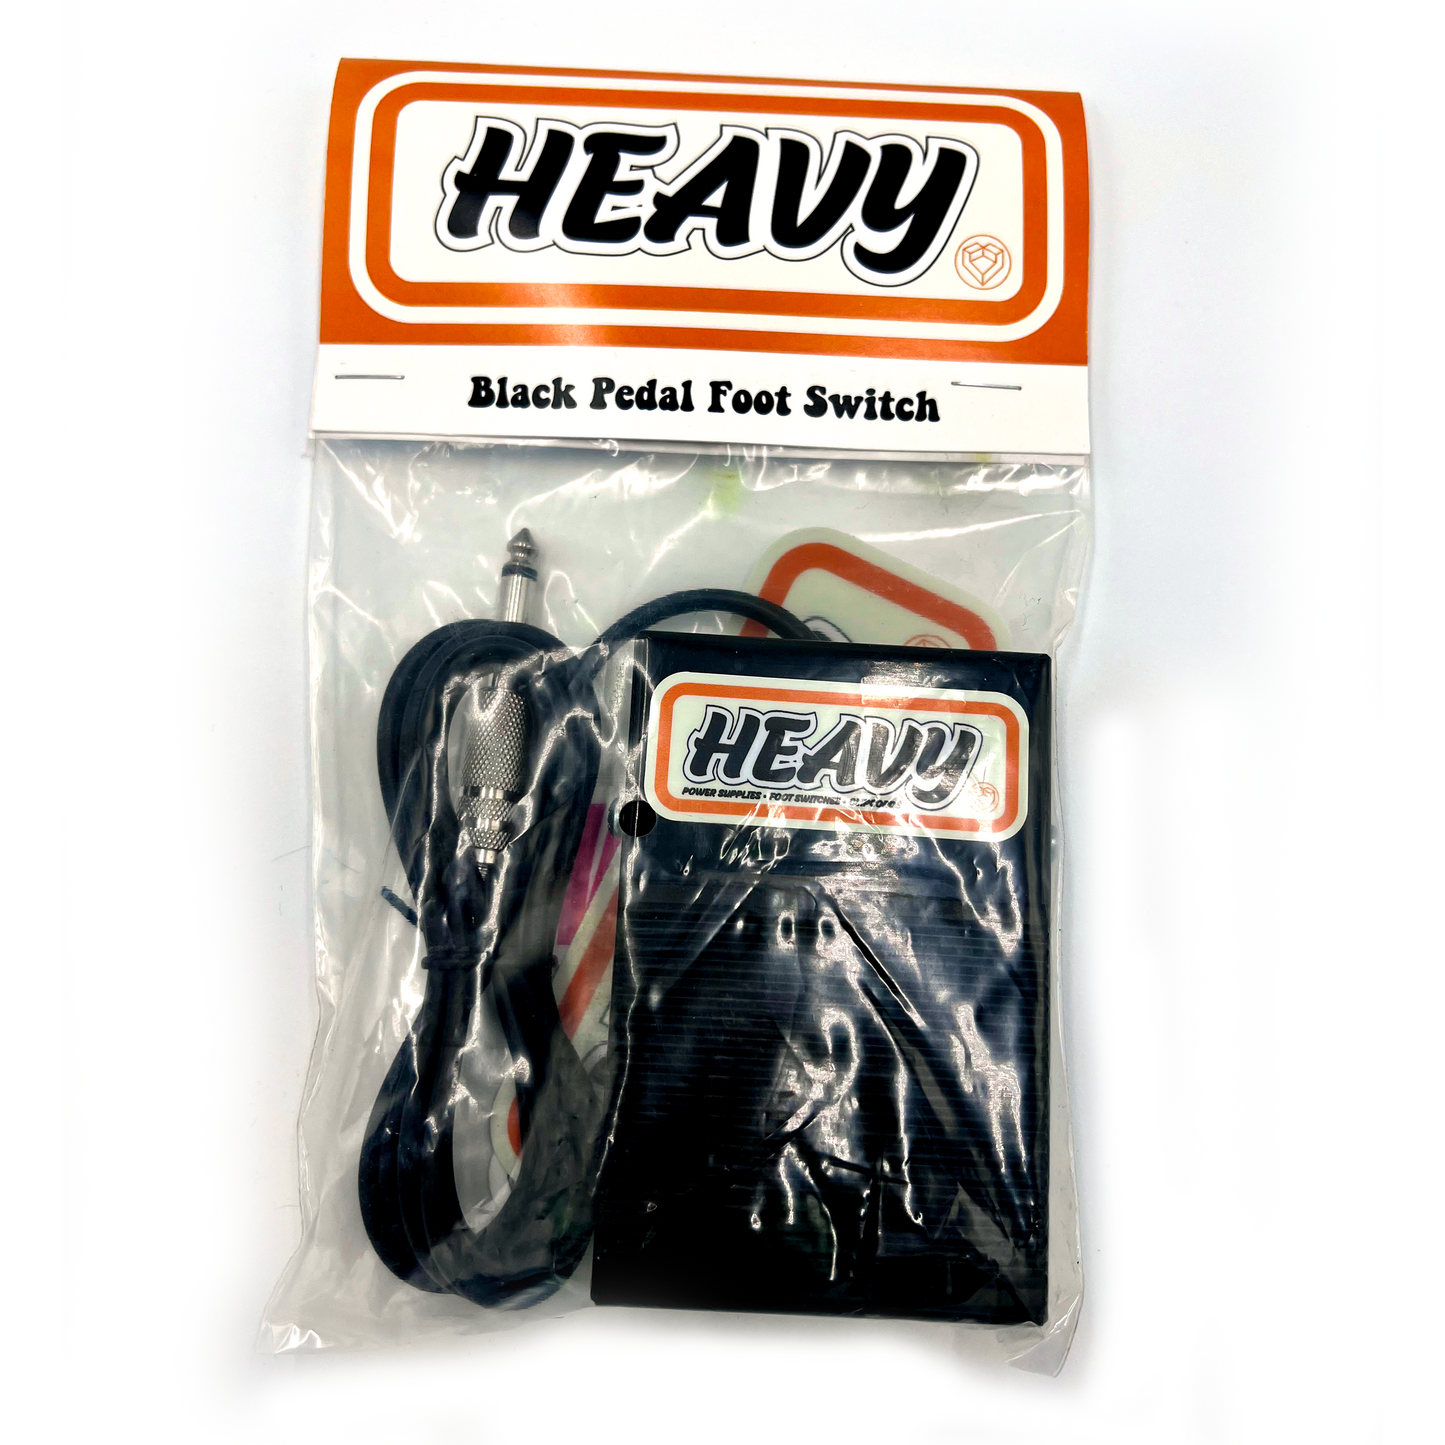 Heavy Black Pedal Foot Switch